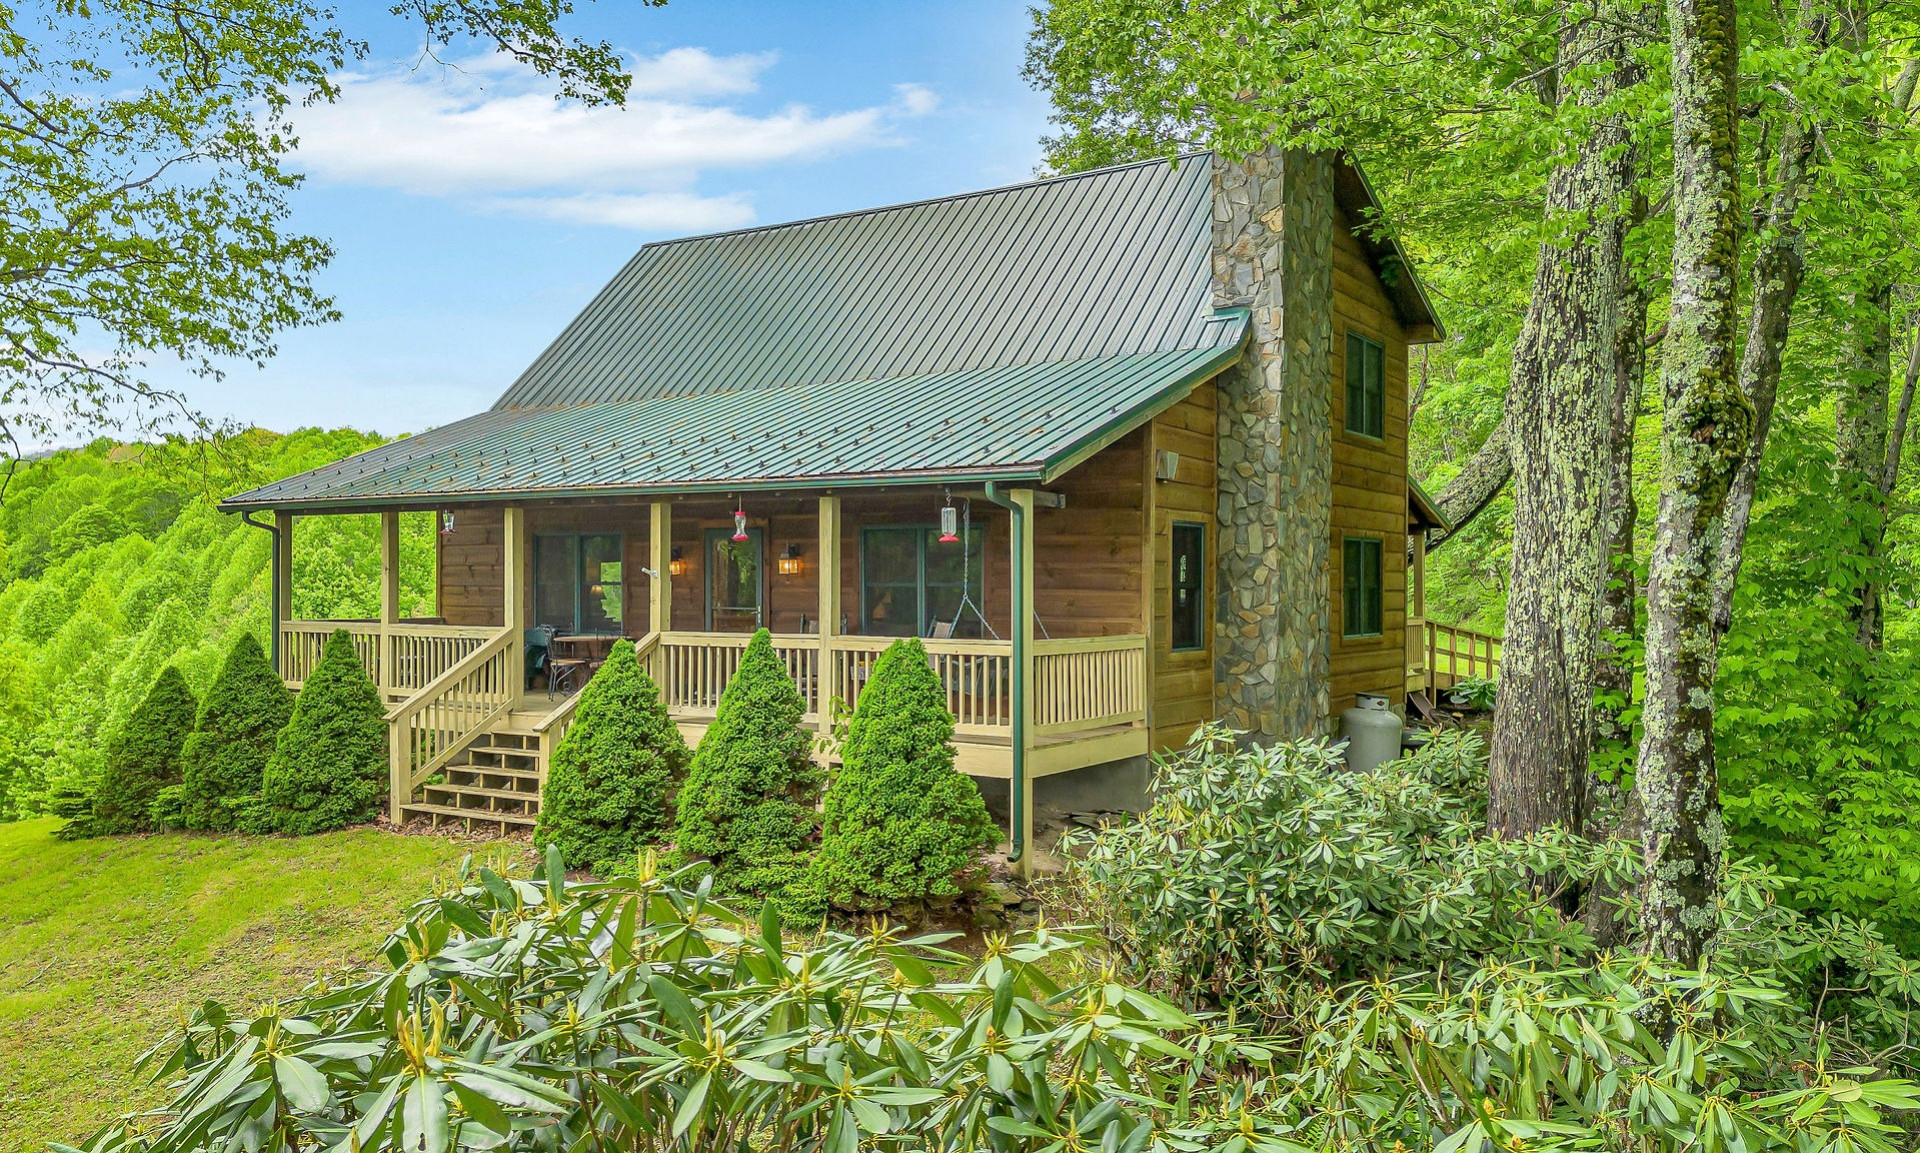 Sweet serenity awaits at this picturesque cabin.